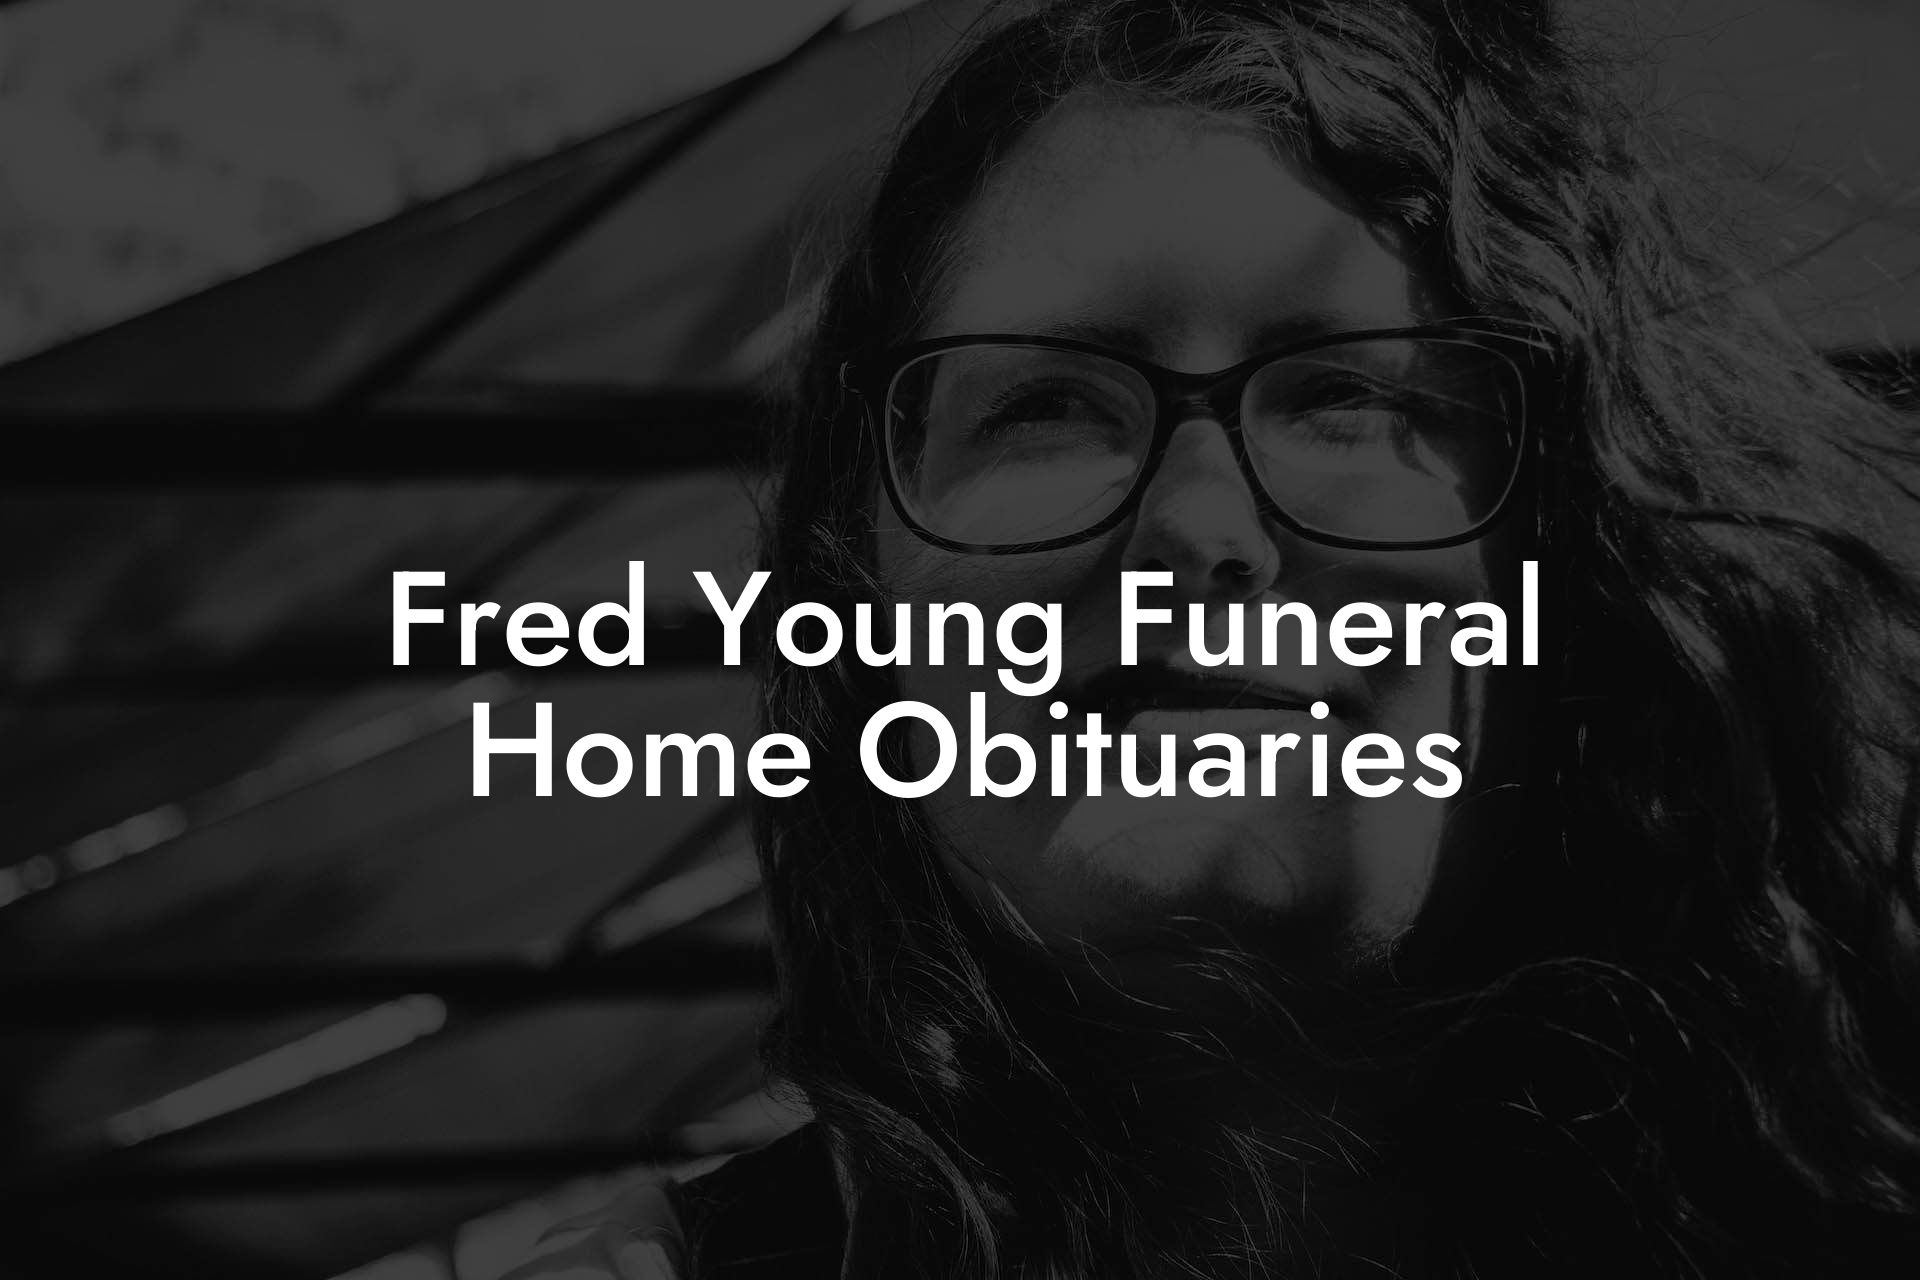 Fred Young Funeral Home Obituaries